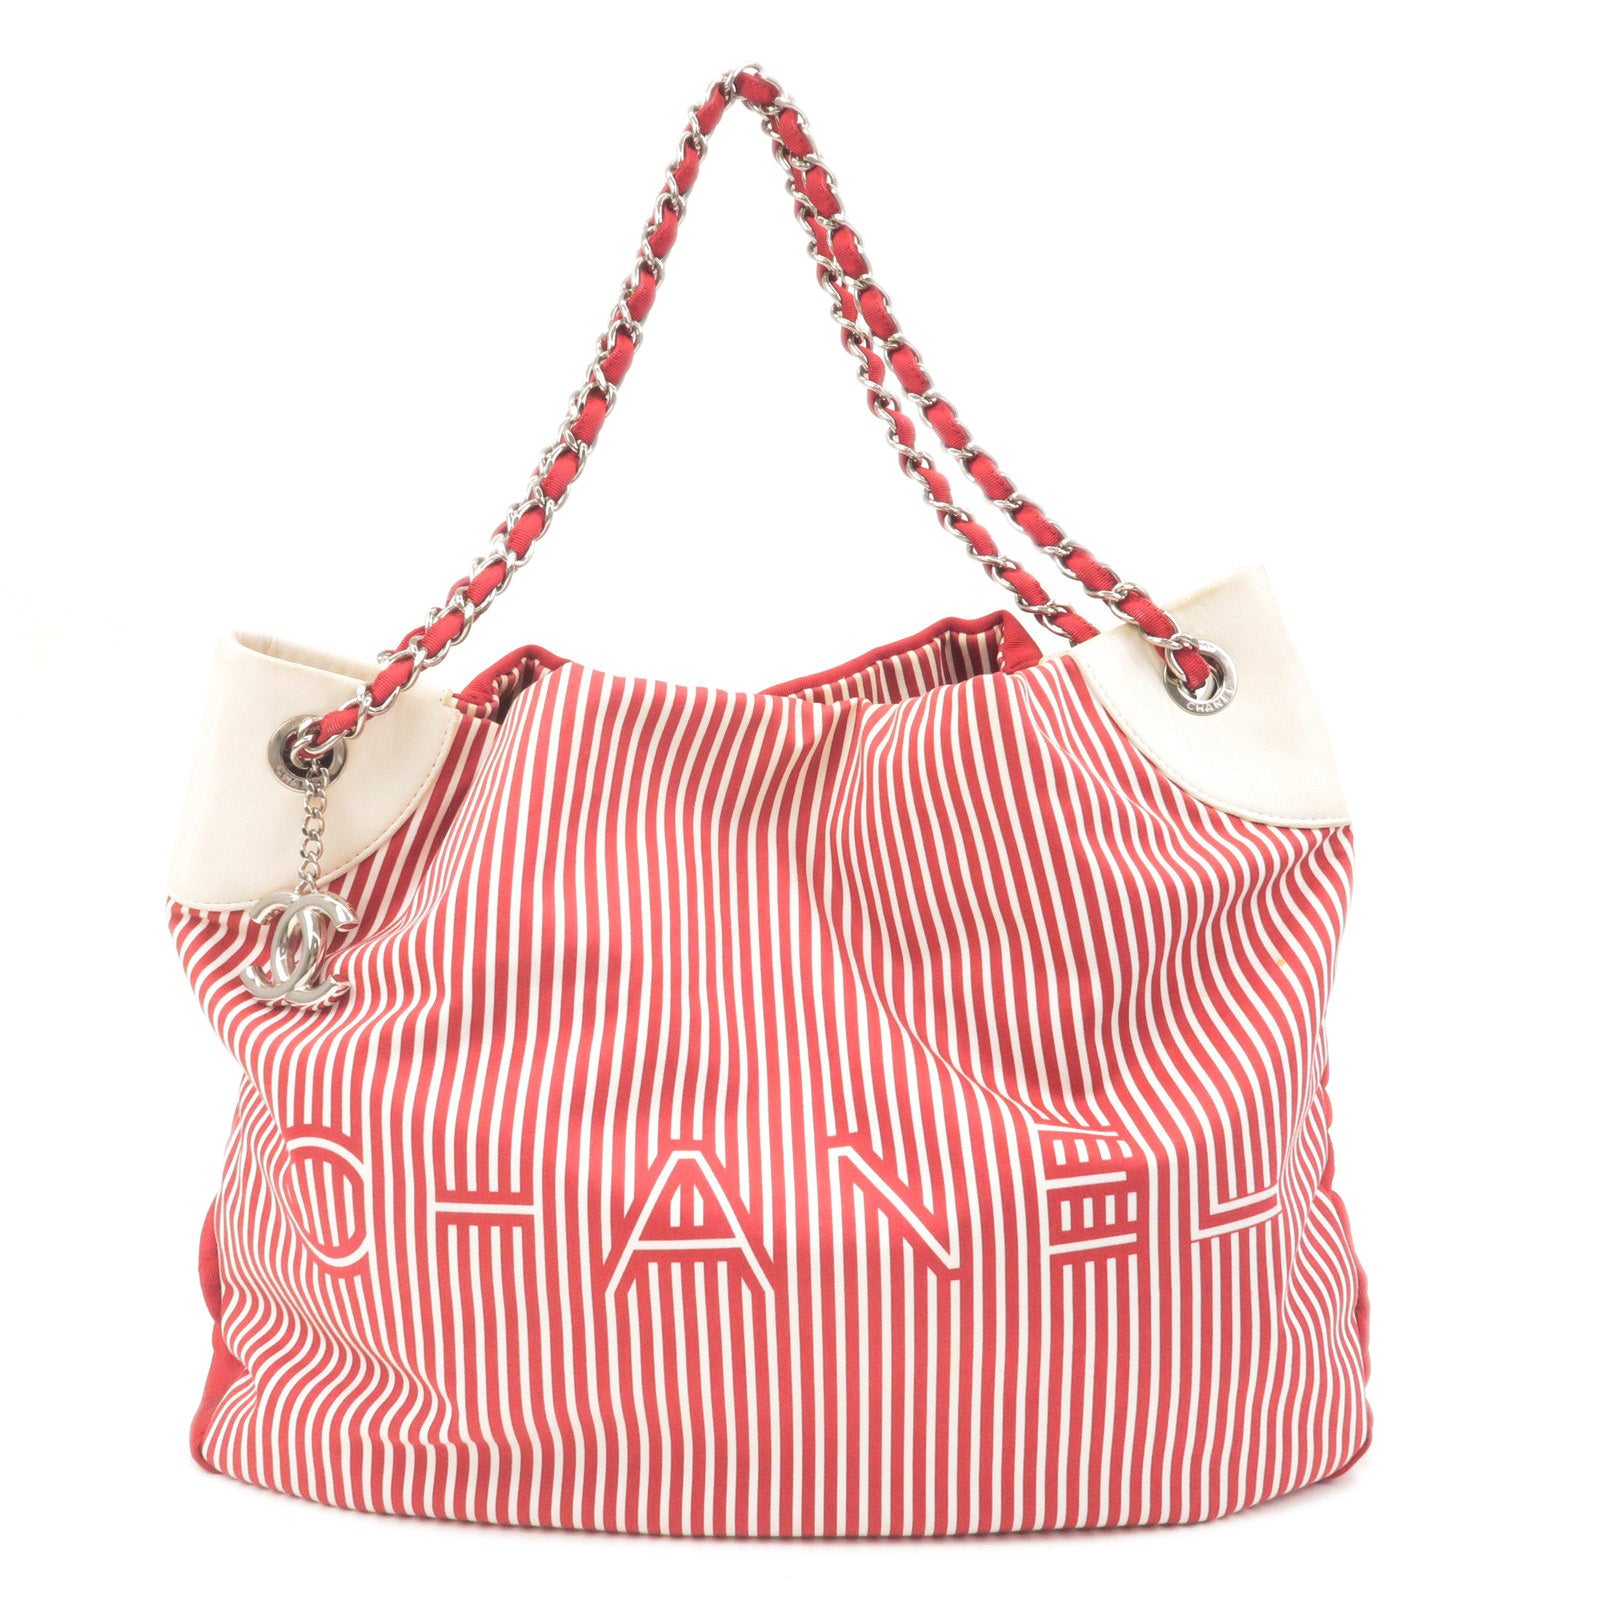 CHANEL-Canvas-Leather-2WAY-Chain-Tote-Bag-Stripe-Red